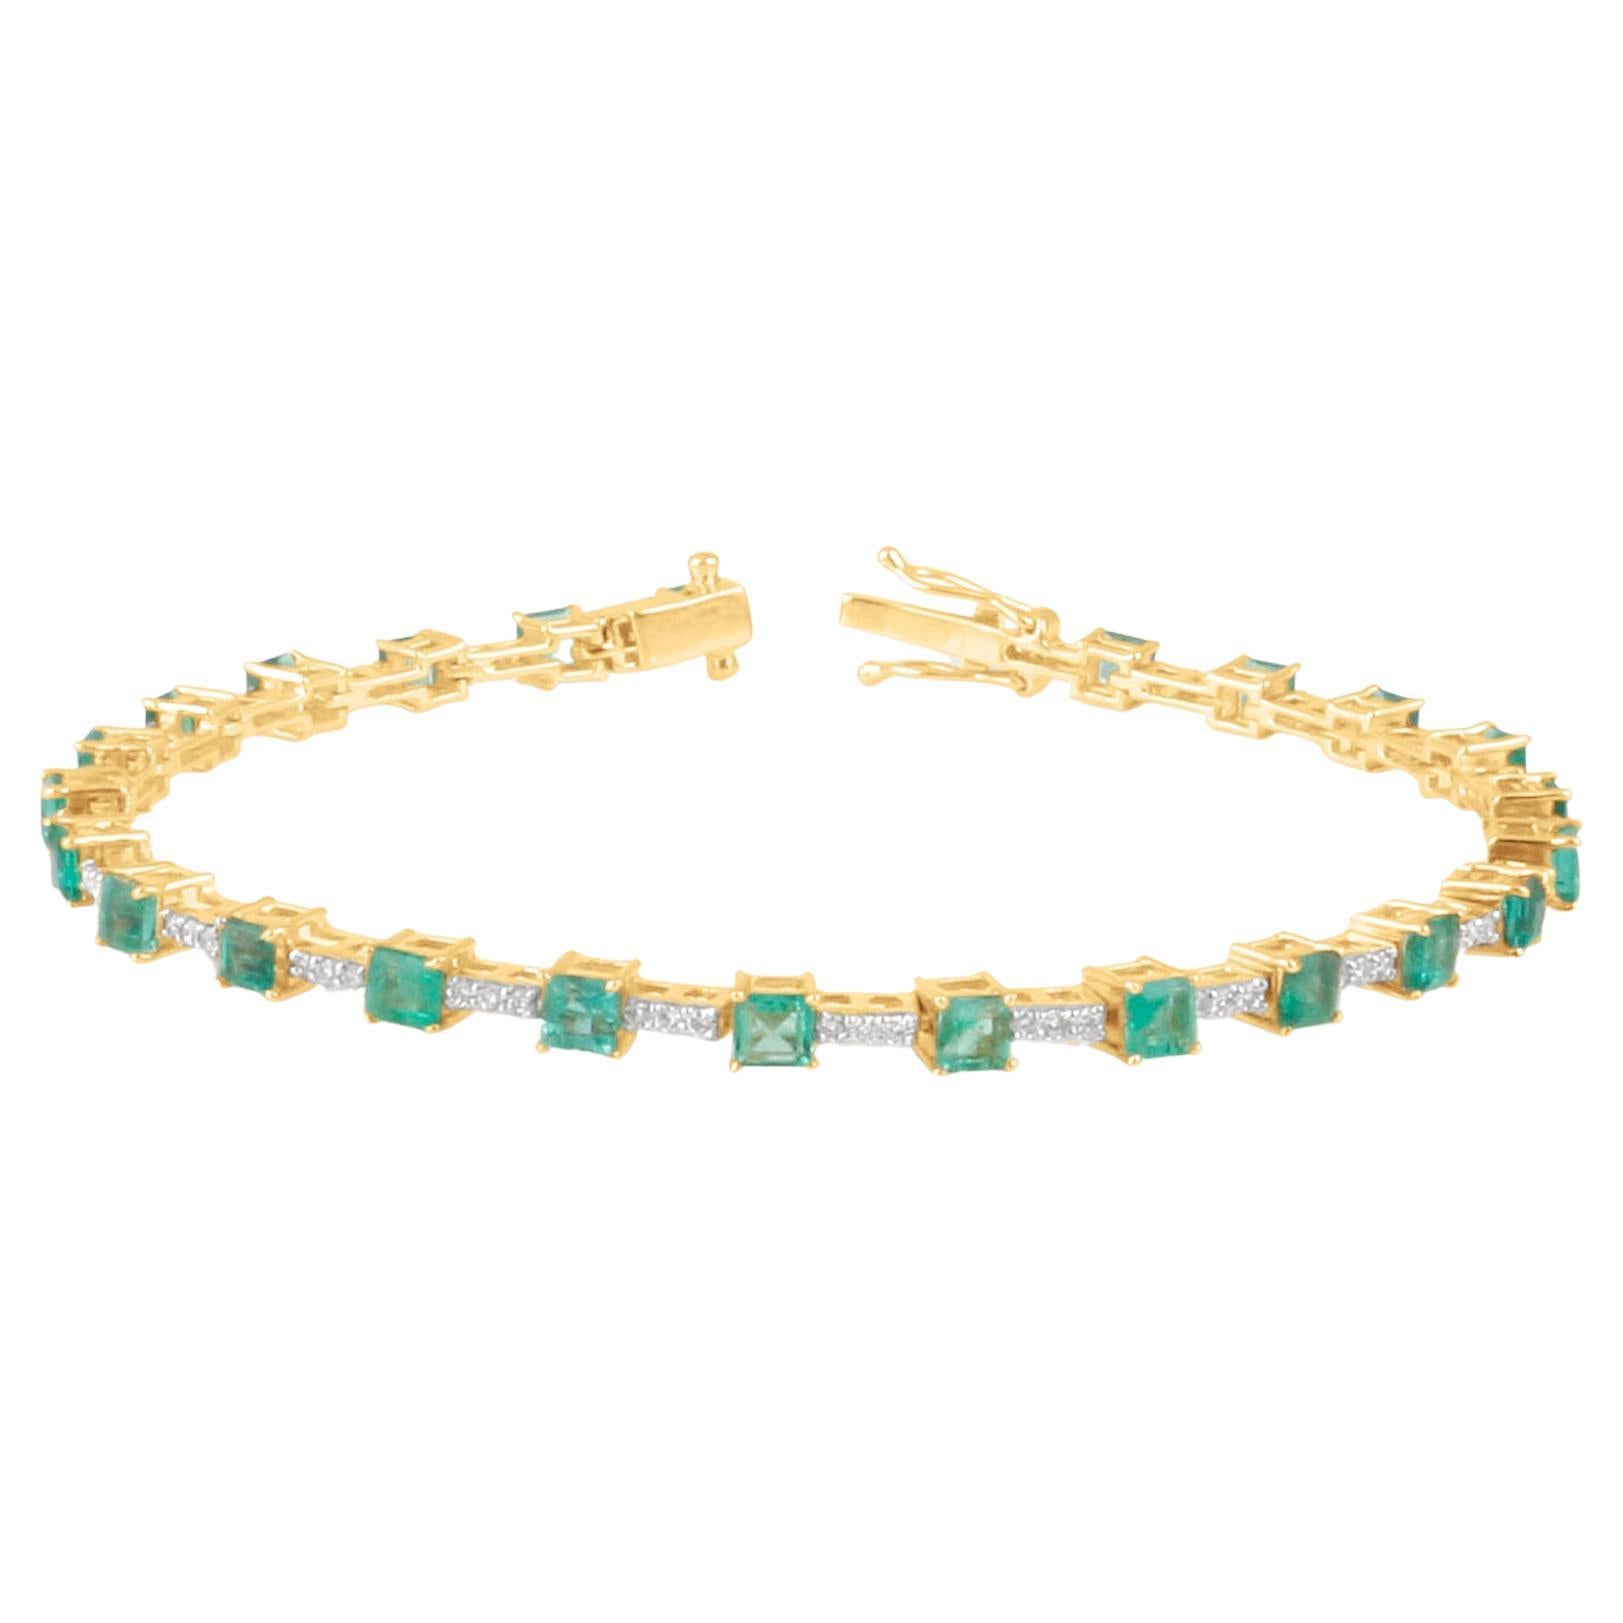 Emerald Square and Diamond Bracelet in 18K Yellow Gold